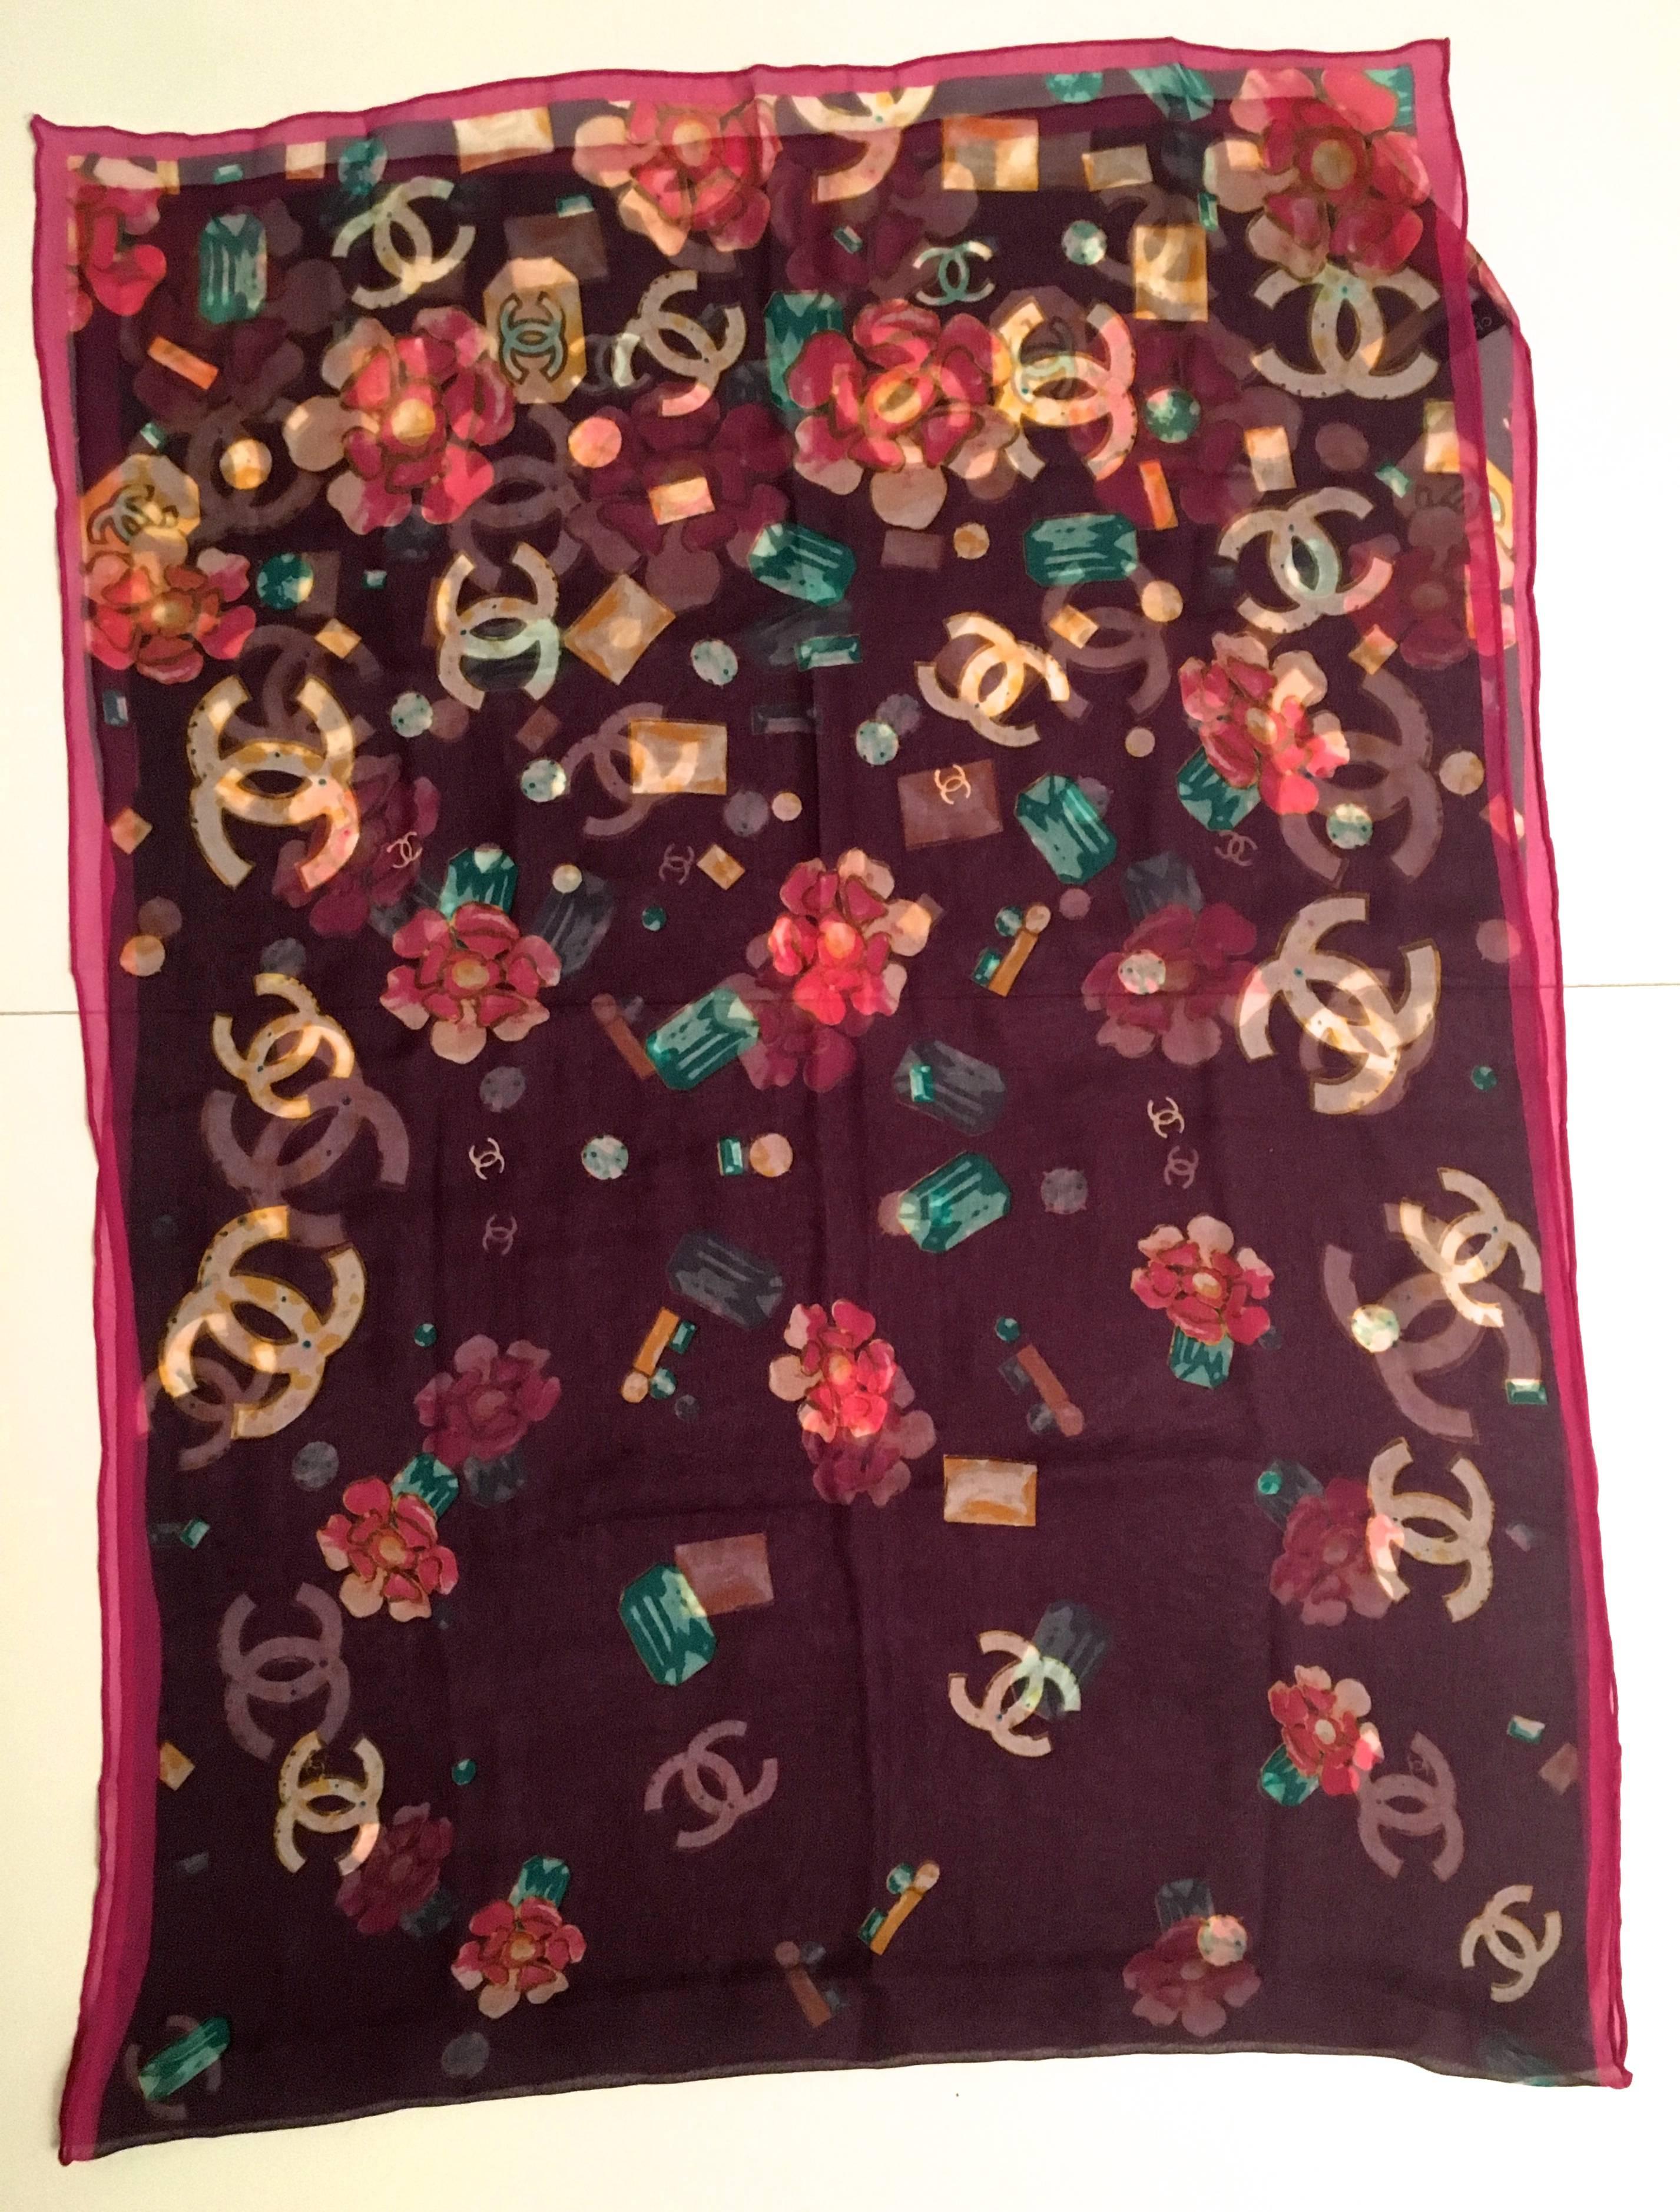 Presented here is a beautiful silk muslin scarf from Chanel. This magnificent scarf is comprised of a beautiful aubergine background with images of gem stones of varying colors throughout the design. The iconic CC logo is adorned throughout the